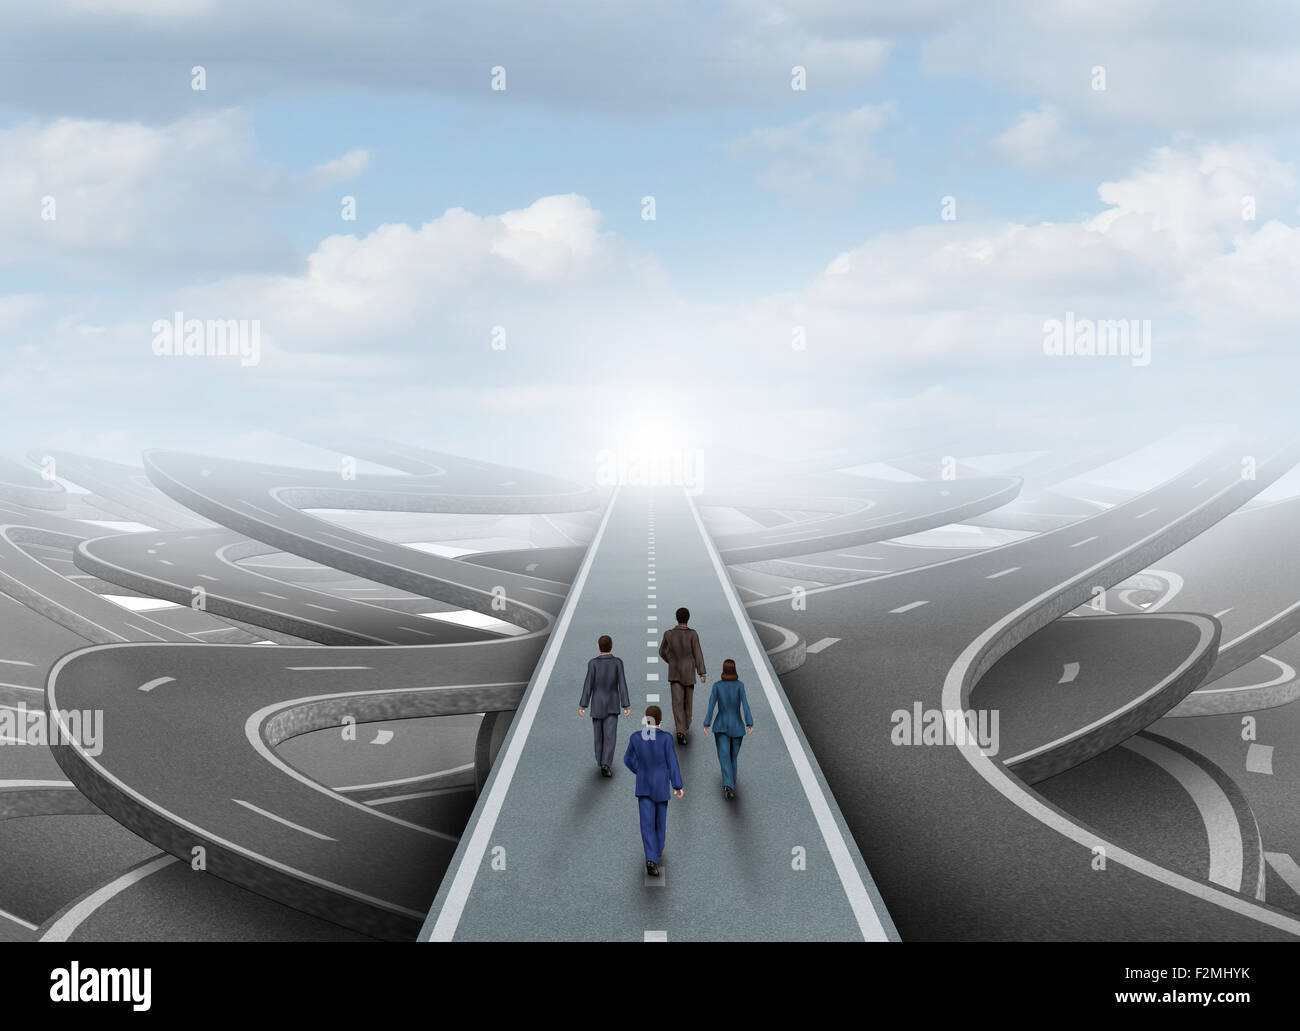 Global business people group walking in a clear forward path on a road surrounded by tangled streets as a symbol of a team or organization overcoming the challenge of confusion. Stock Photo